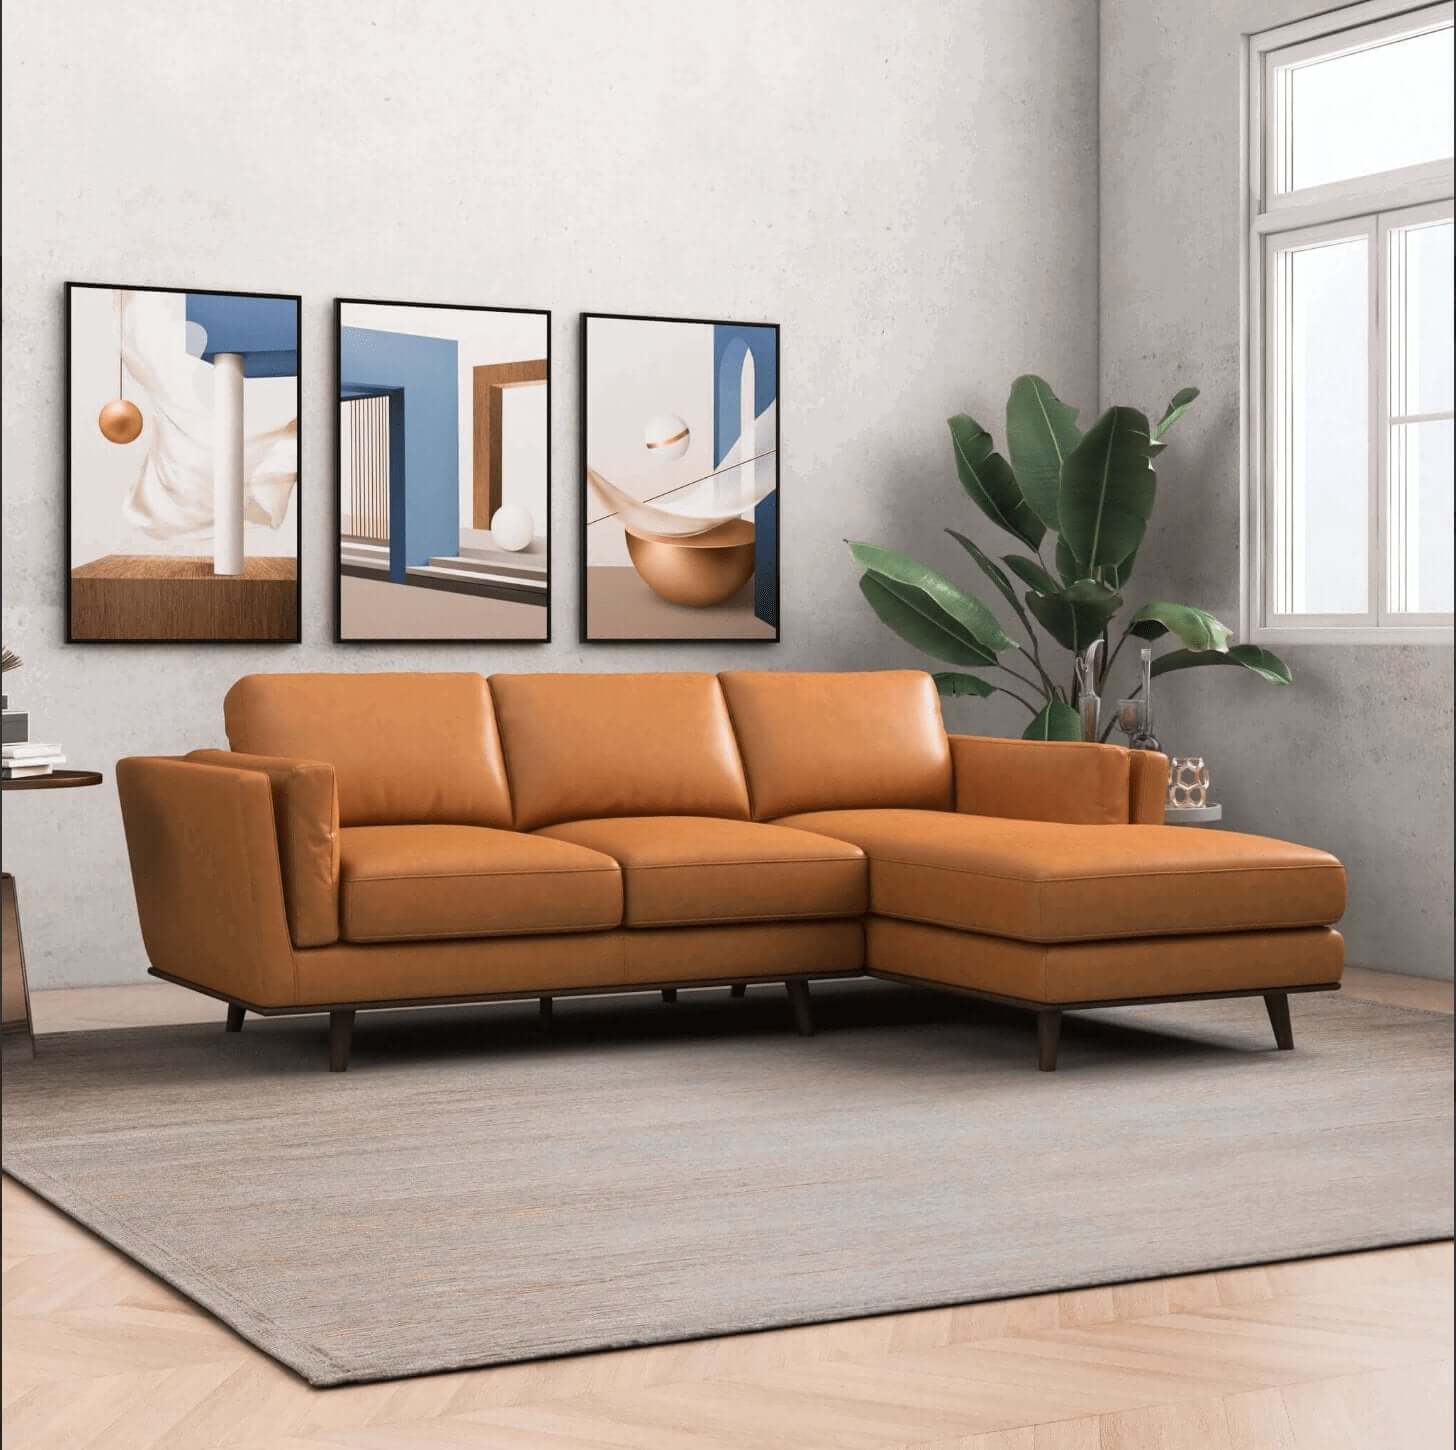 Chase MCM Leather Chaise Sectional Sofa 92" - Revel Sofa 